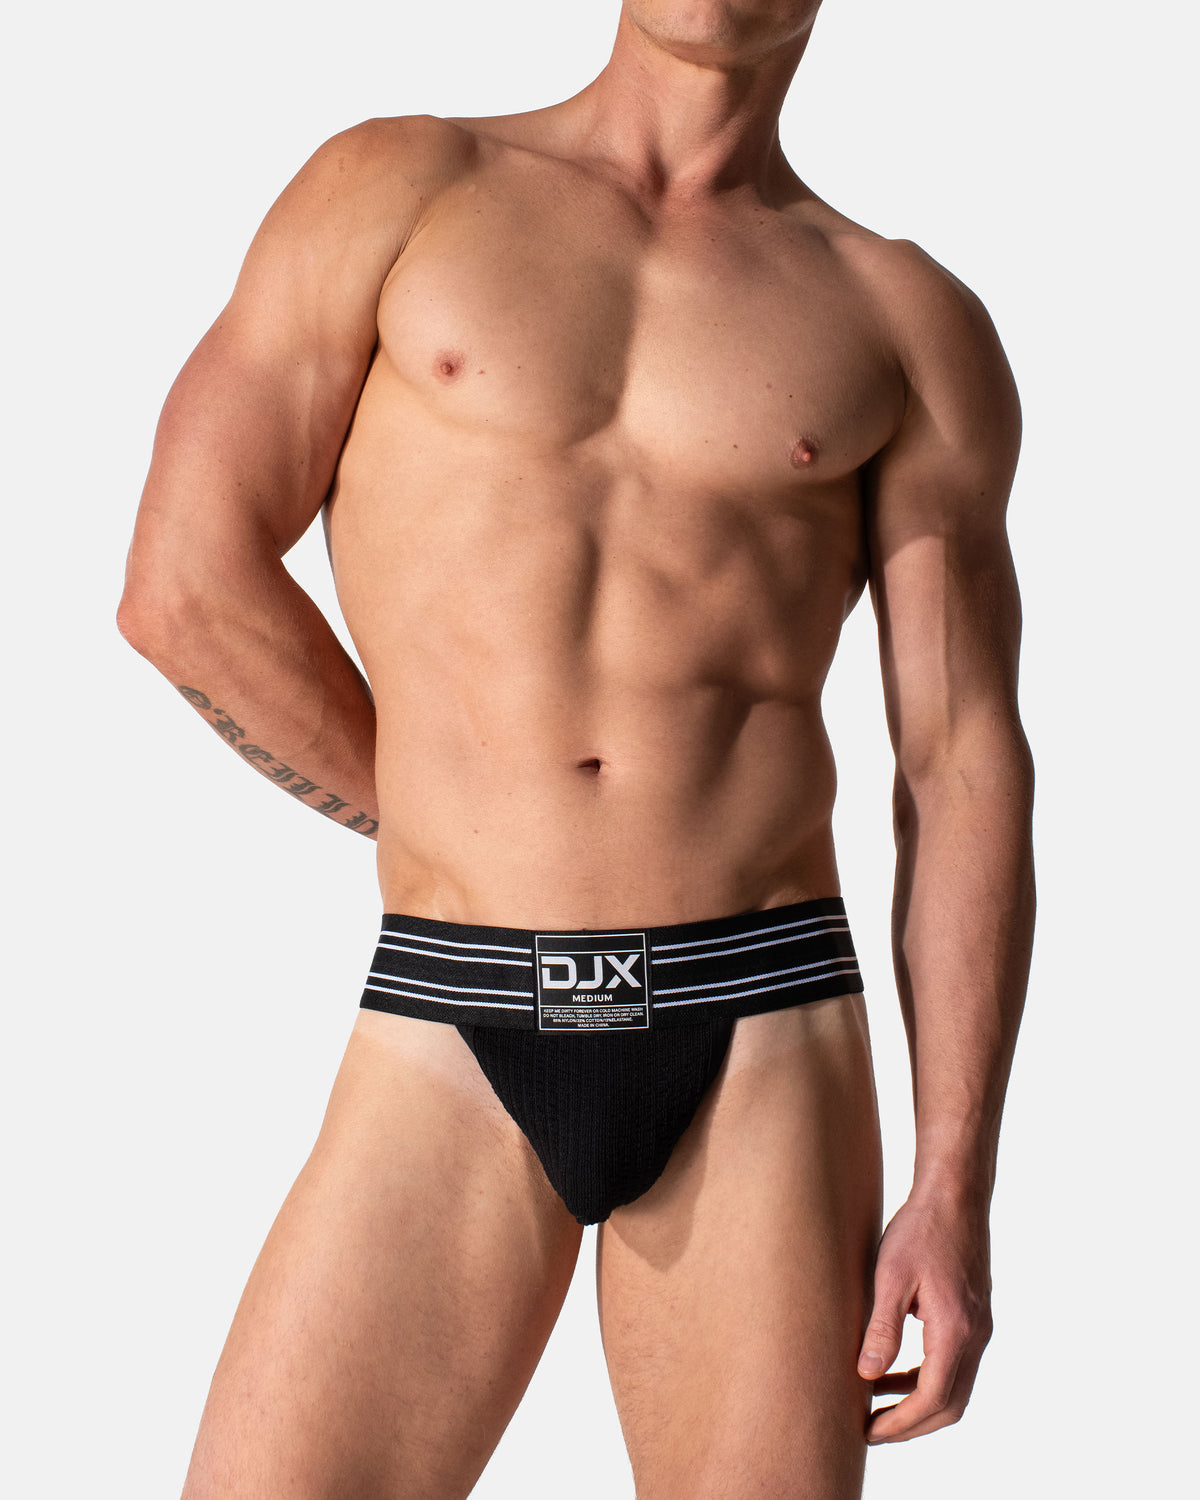 Topdrawers Underwear - Get the Ultimate Party Look with DJX from